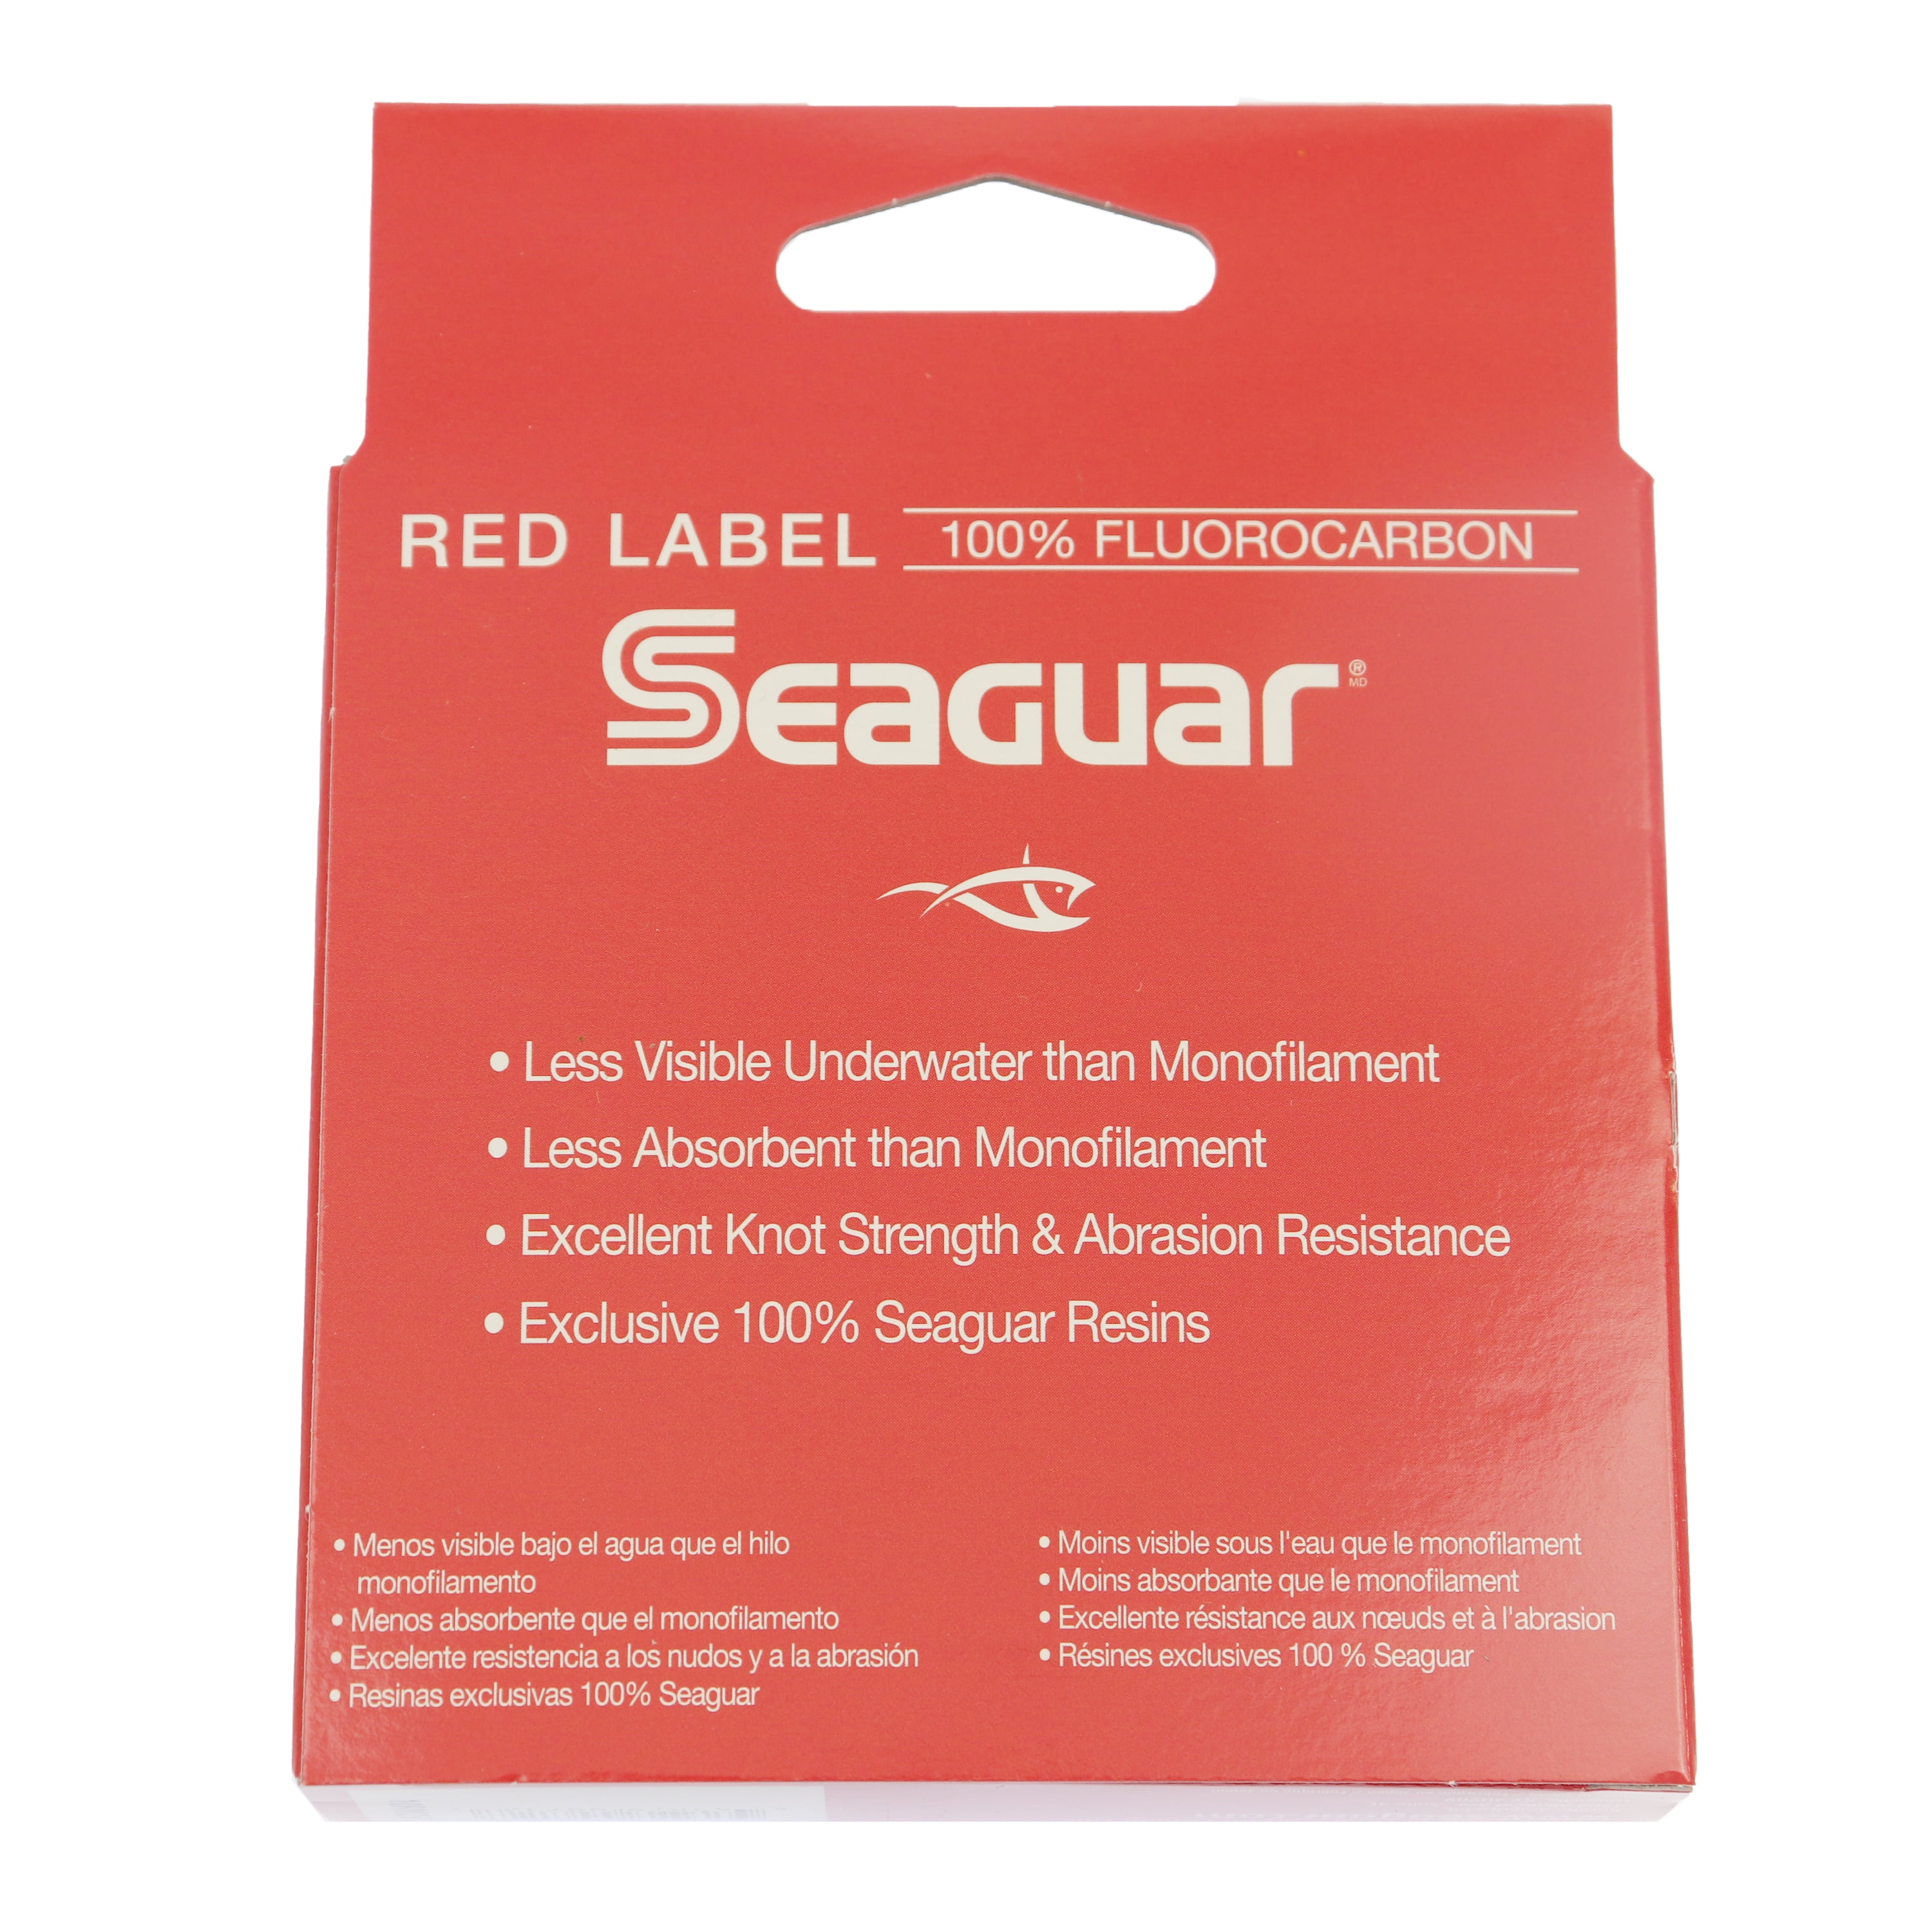 SEAGUAR RED LABEL Fluorocarbon Fishing Line 20lb 175 YARDS FREE USA  SHIPPING!